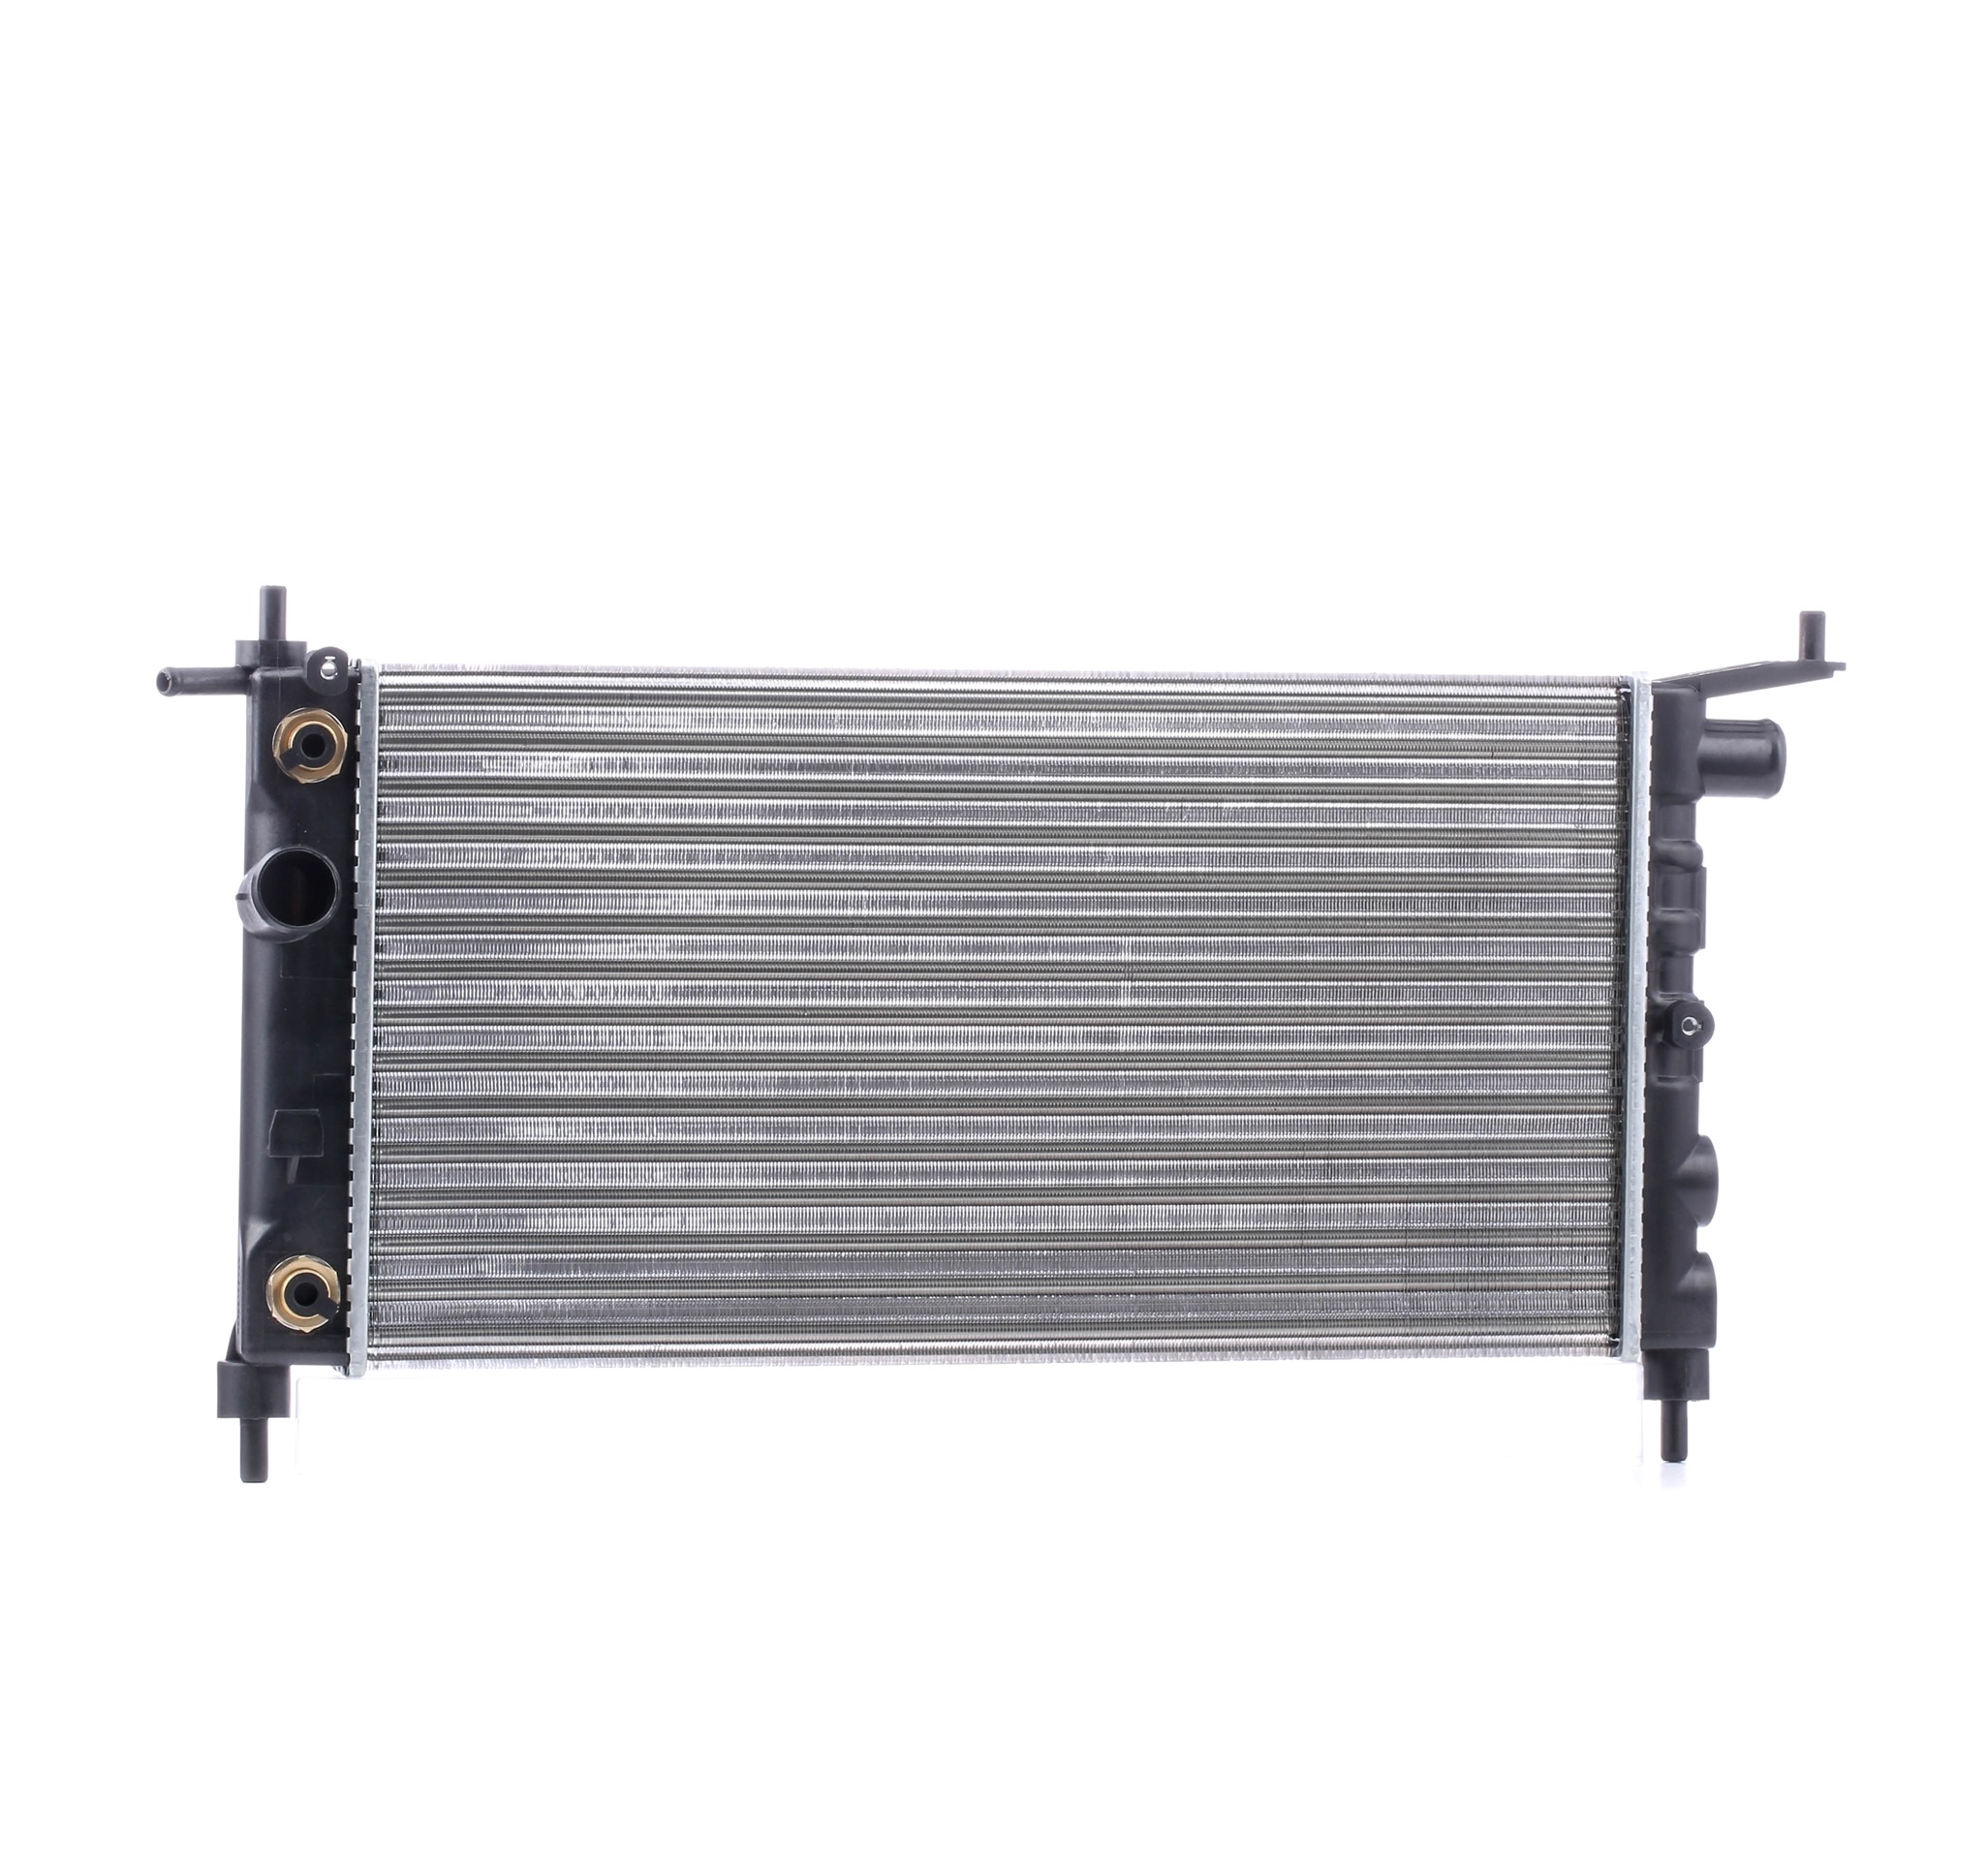 STARK SKRD-0120564 Engine radiator Aluminium, for vehicles without air conditioning, Automatic Transmission, Mechanically jointed cooling fins